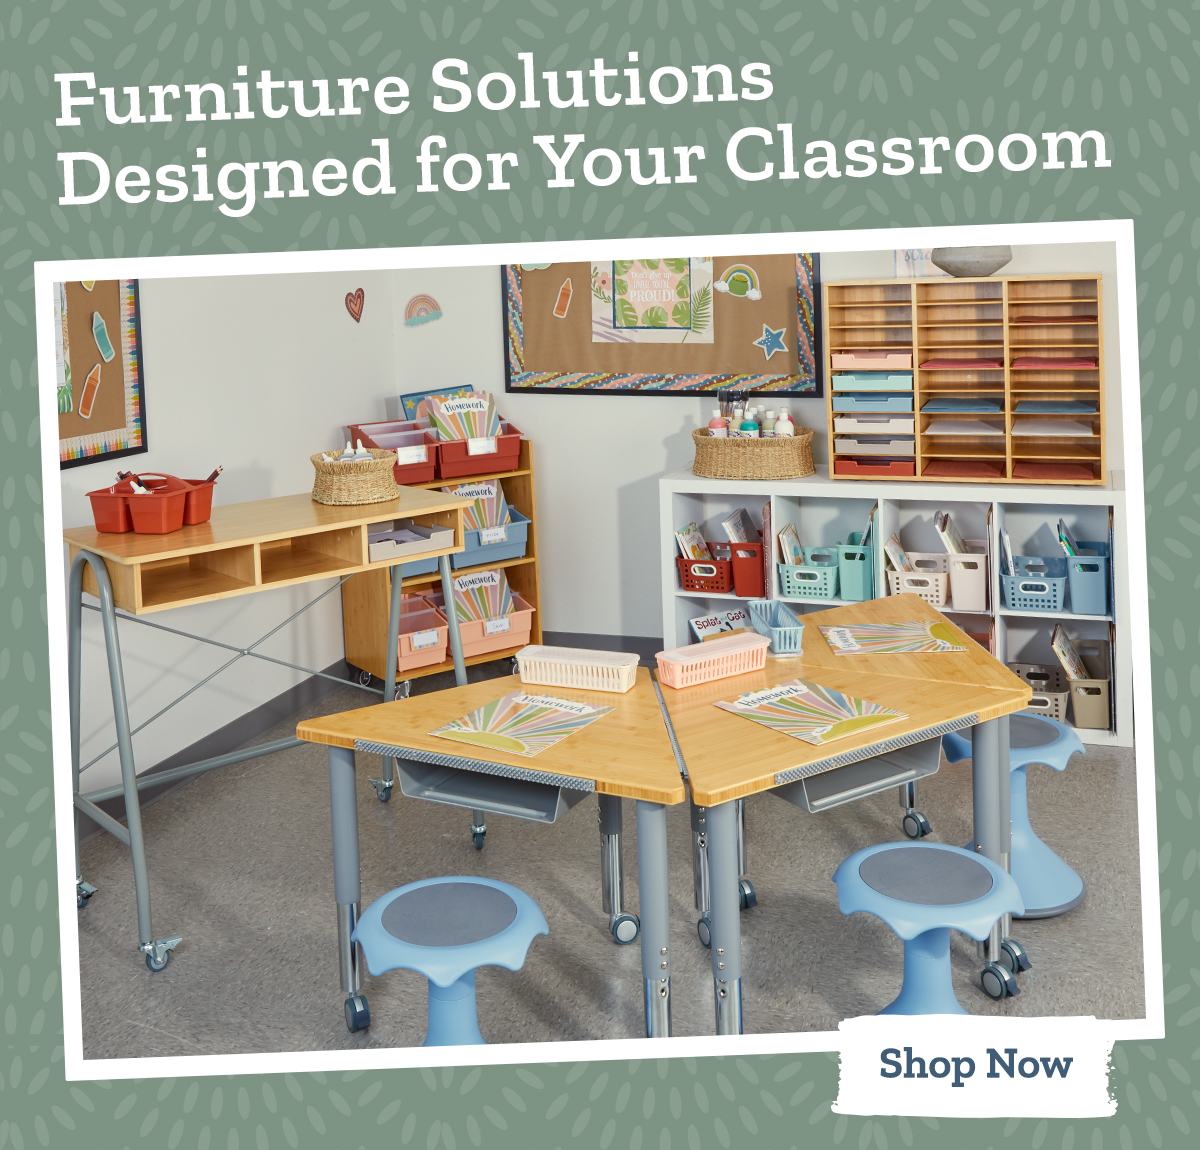 Furniture solutions designed for your classroom